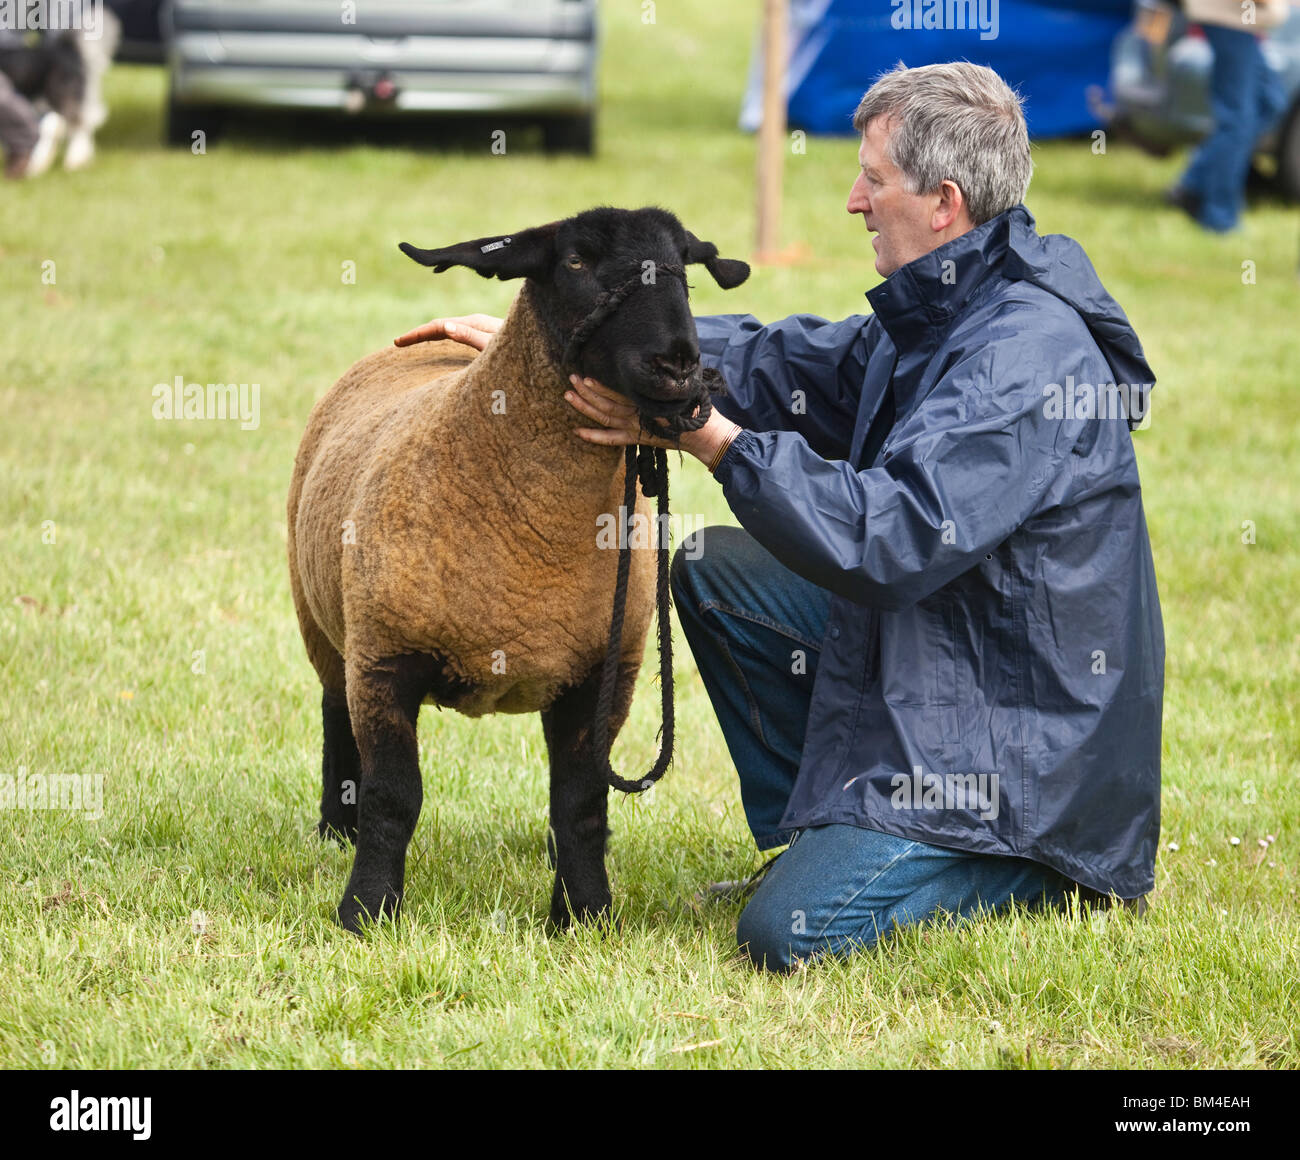 A farmer with his prizewinning Suffolk breed sheep at an agricultural show Stock Photo